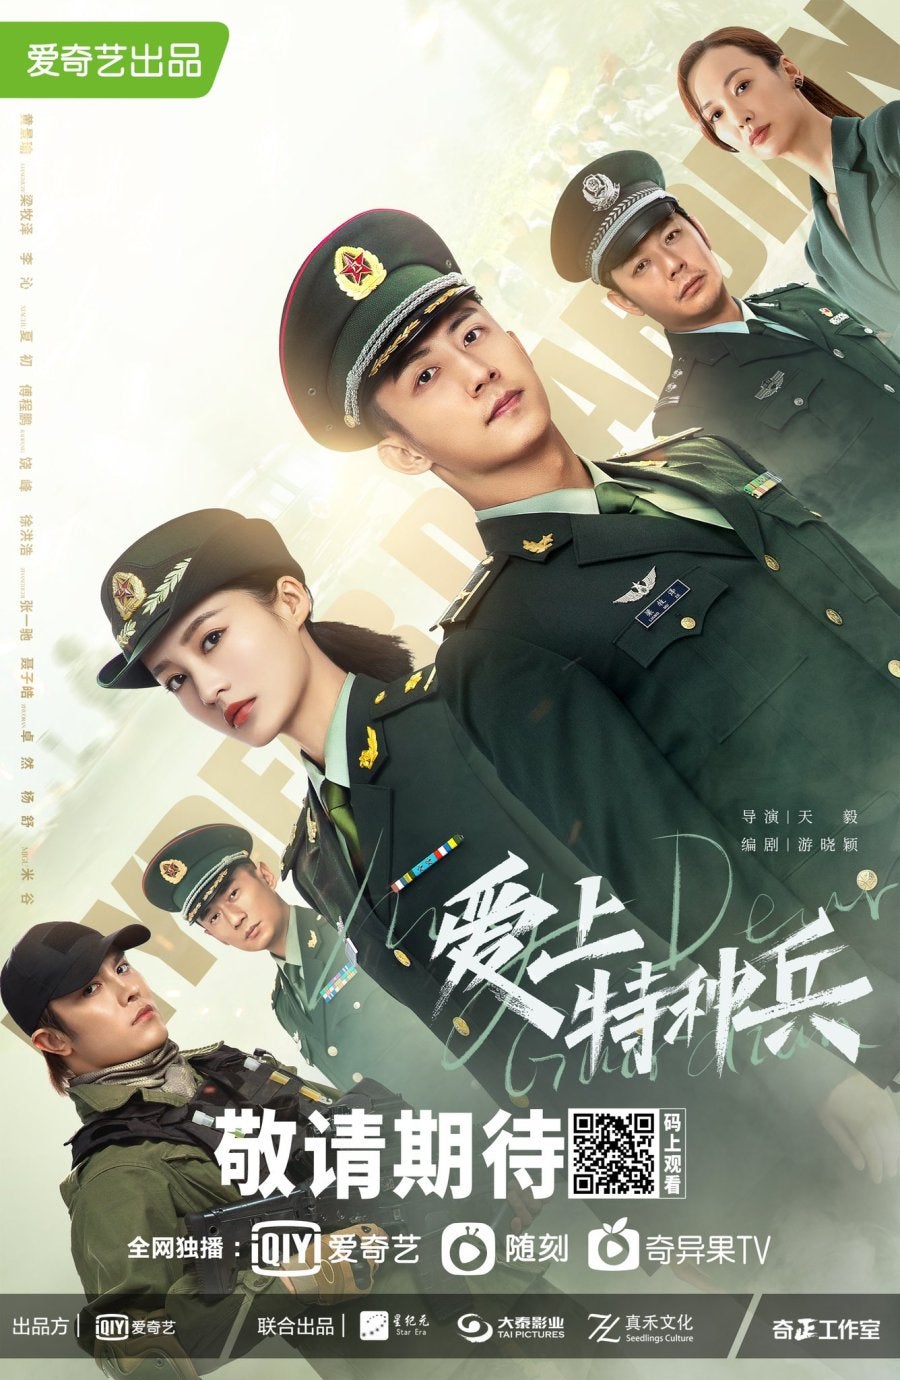 TV ratings for My Dear Guardian (亲爱的戎装) in Spain. iqiyi TV series